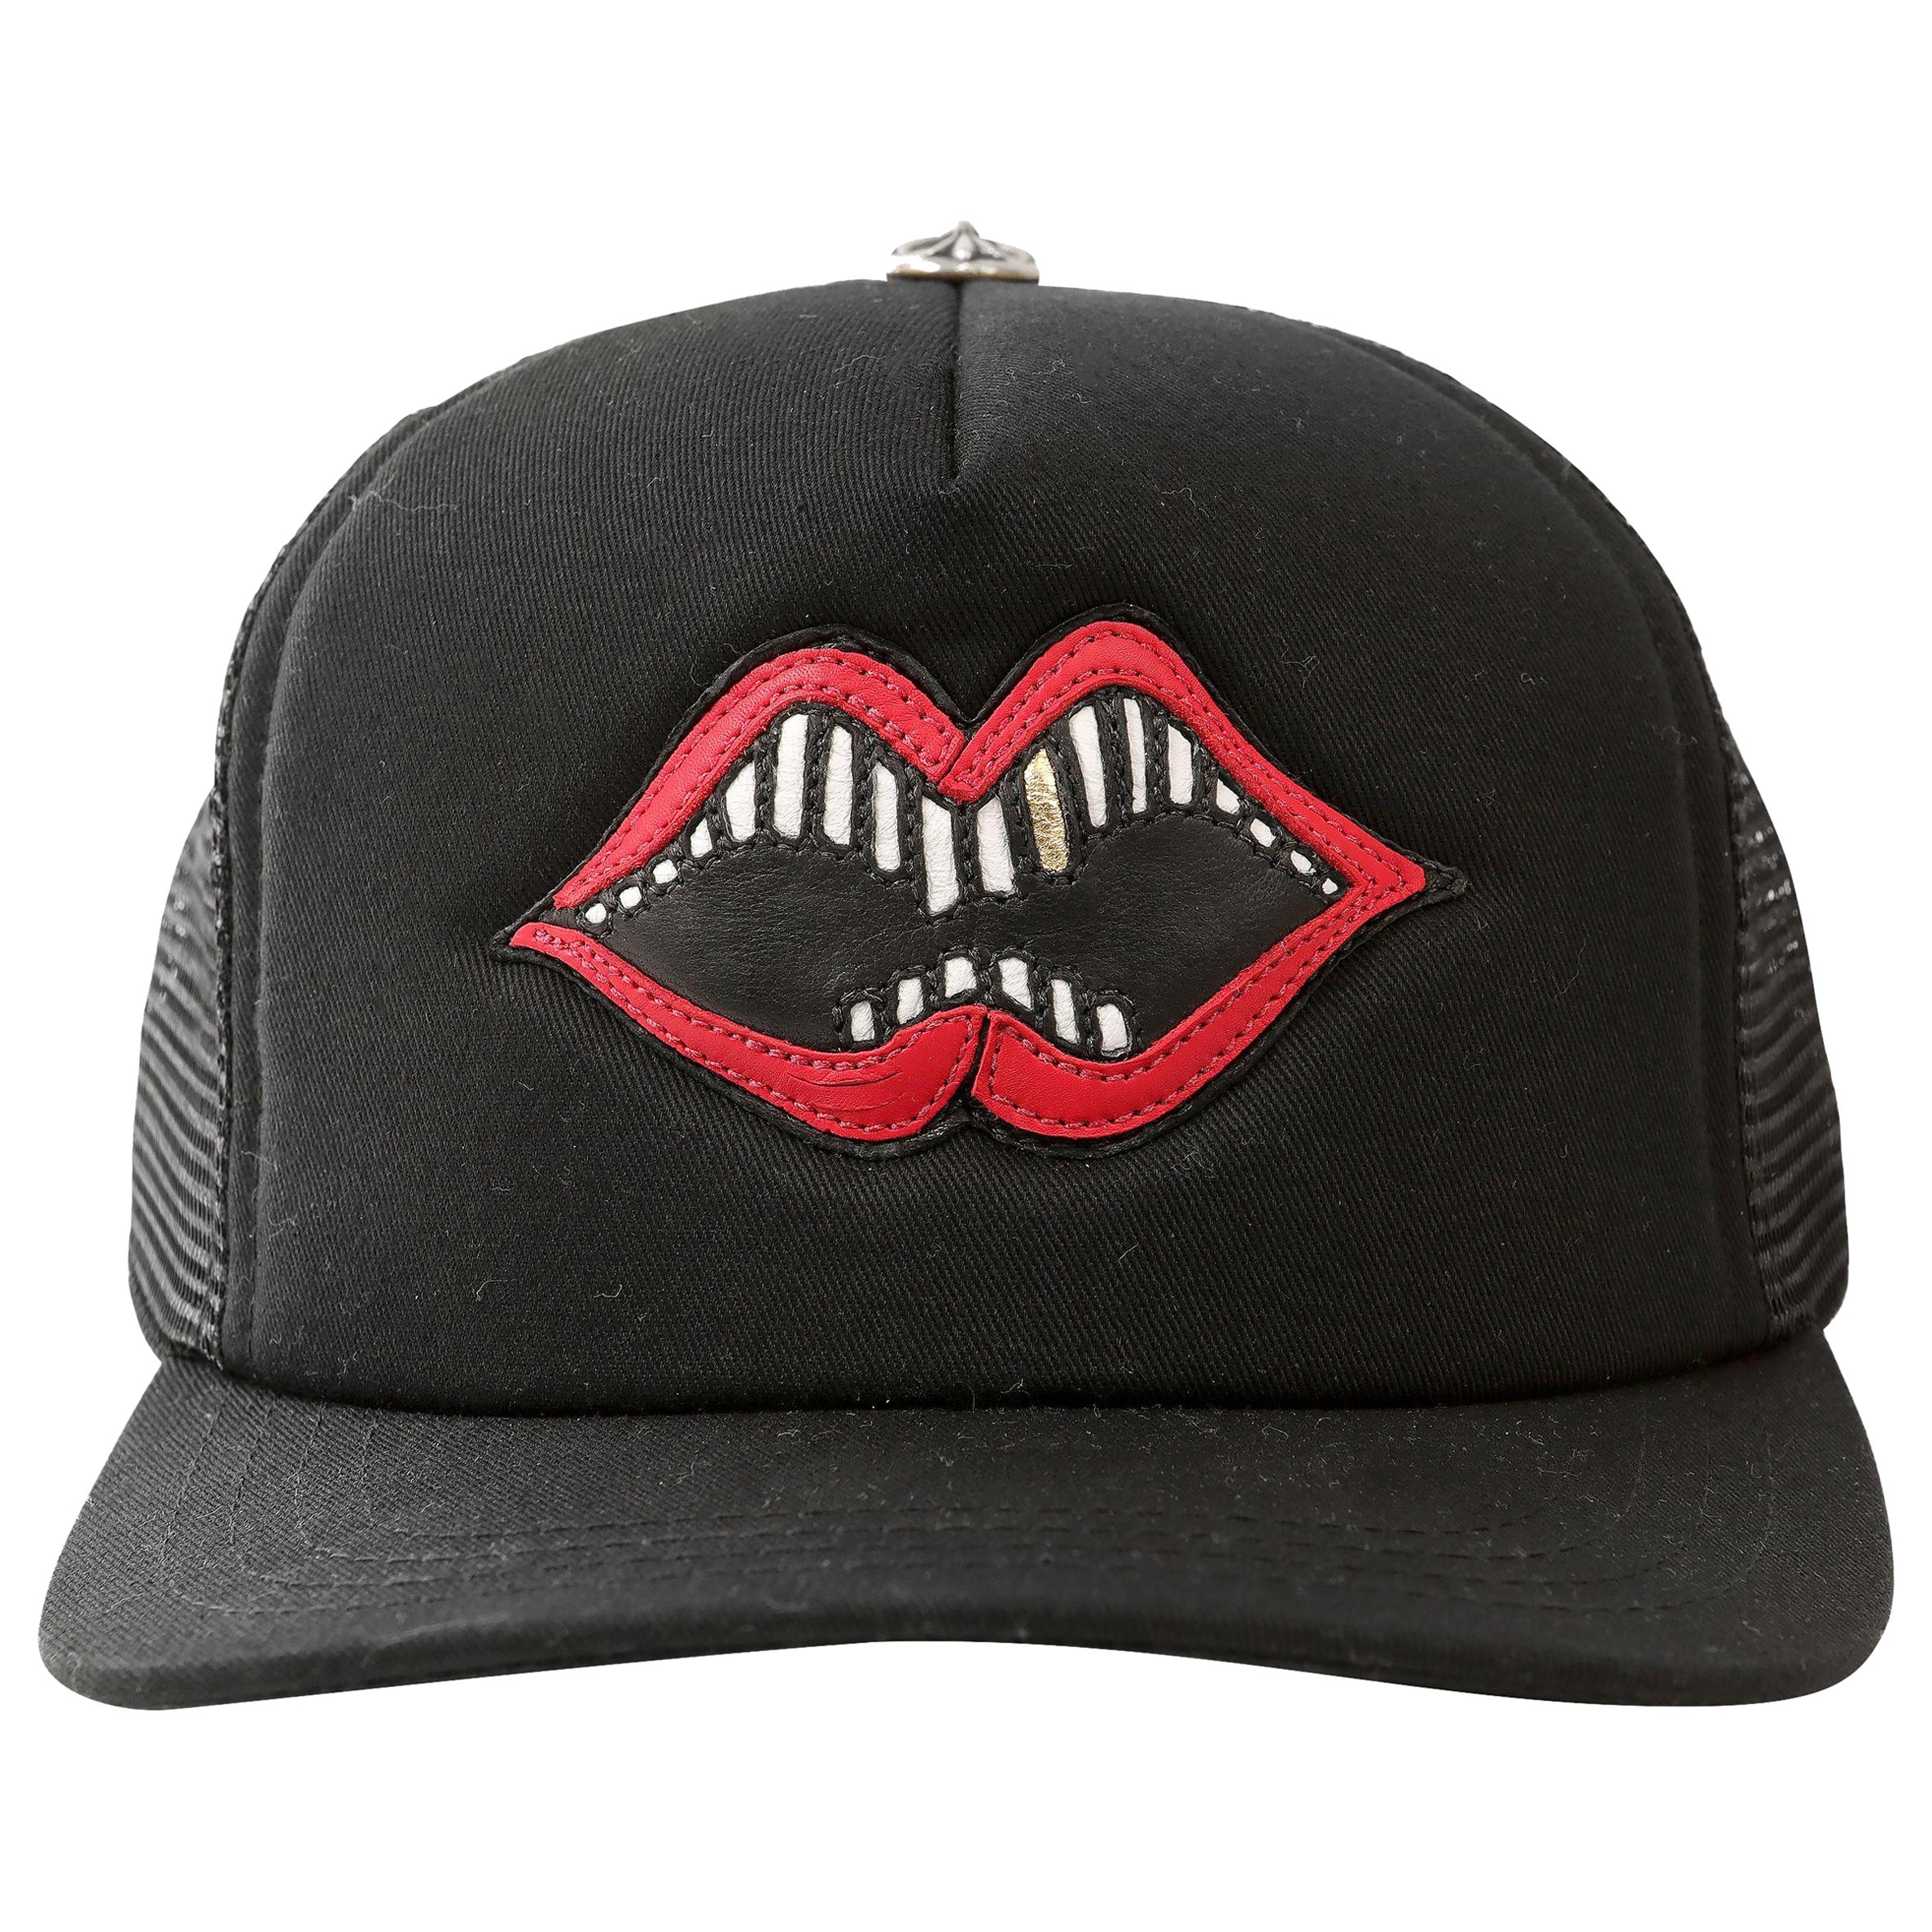 Chrome Hearts Black Gold Grill Canvas Hat For Sale